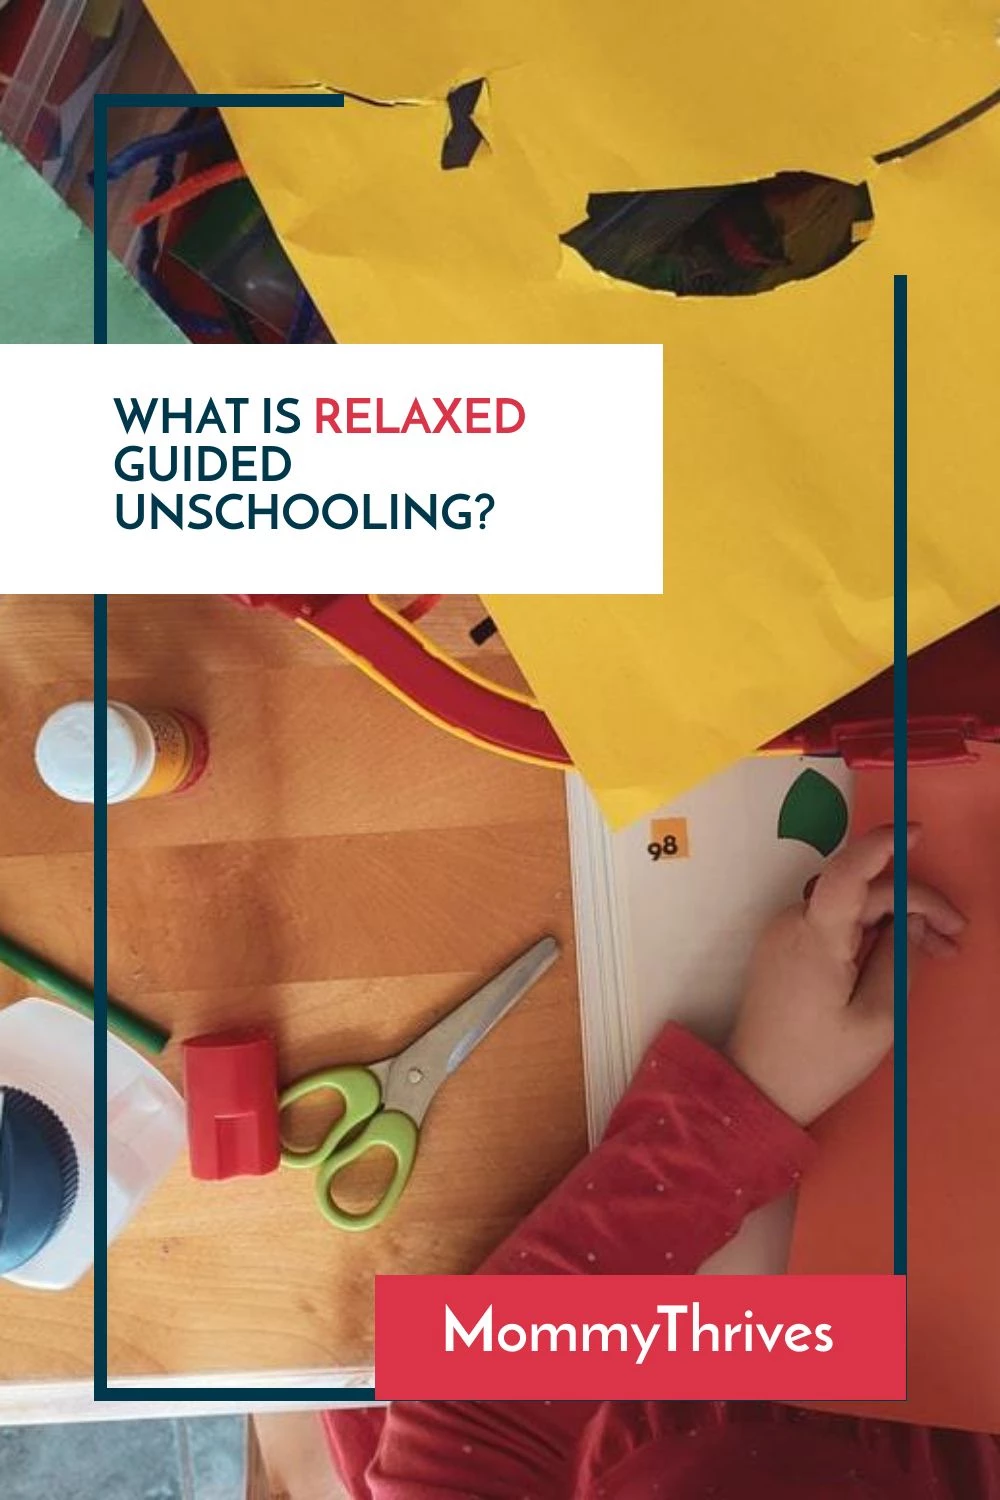 Relaxed Guided Unschooling Method for Homeschoolers - Homeschool Methods Relaxed - Unschooling Method For Homeschool